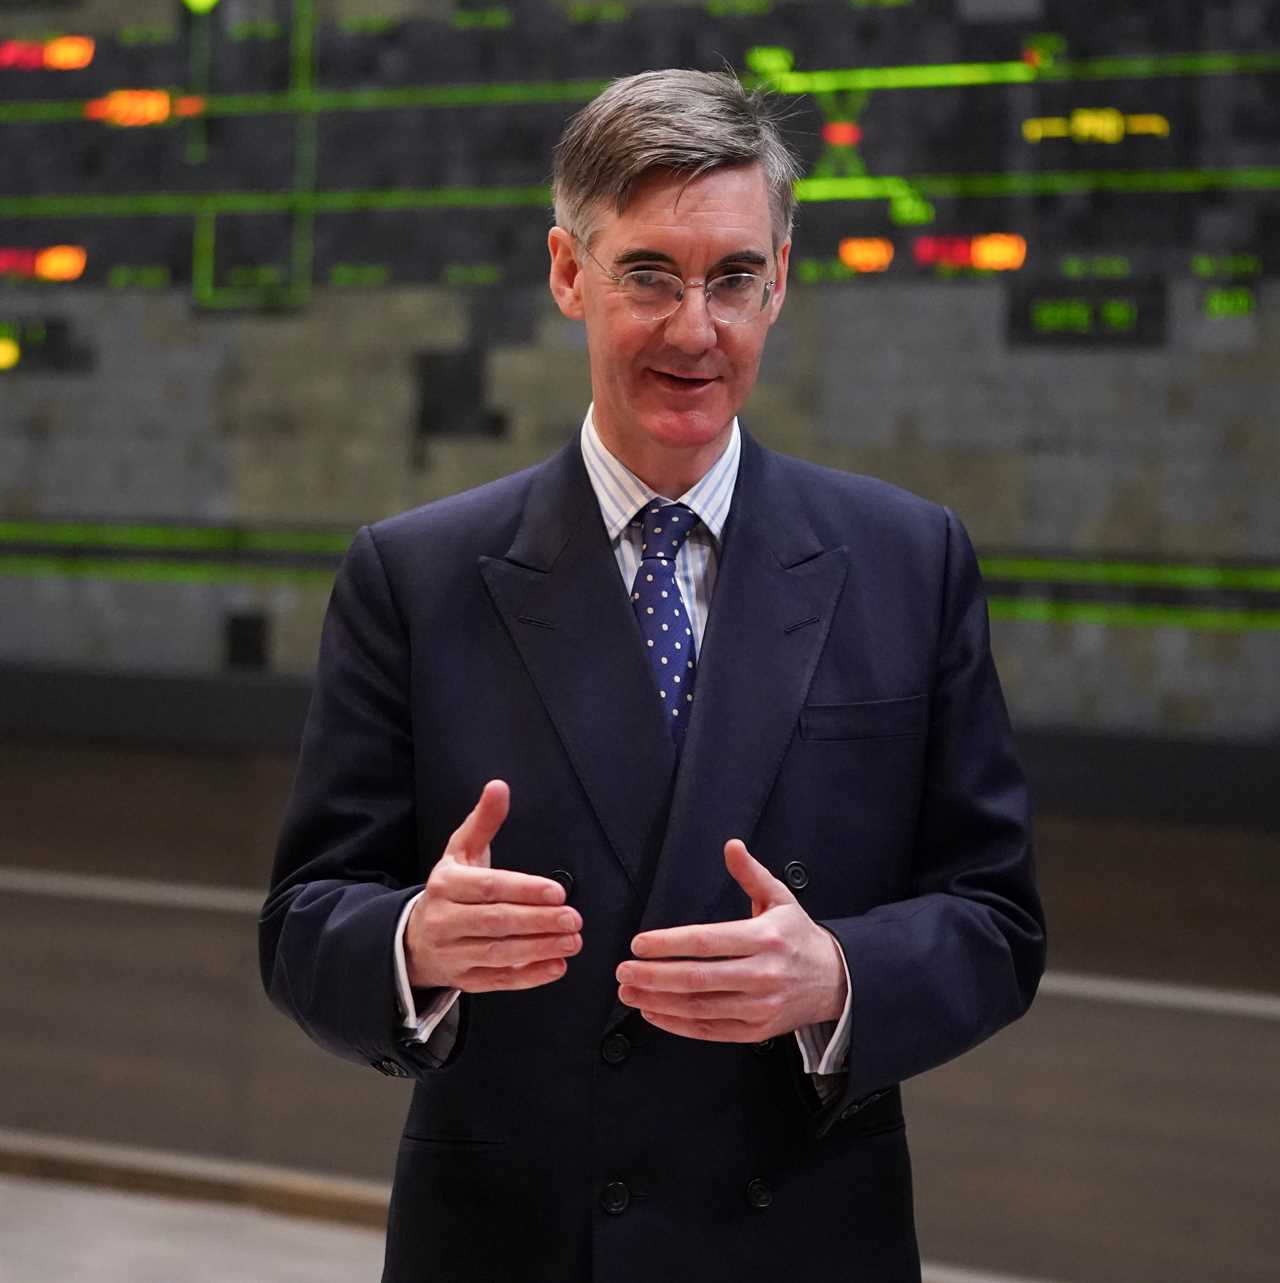 Britain should reopen debate on fixed penalty notices, says Jacob Rees-Mogg